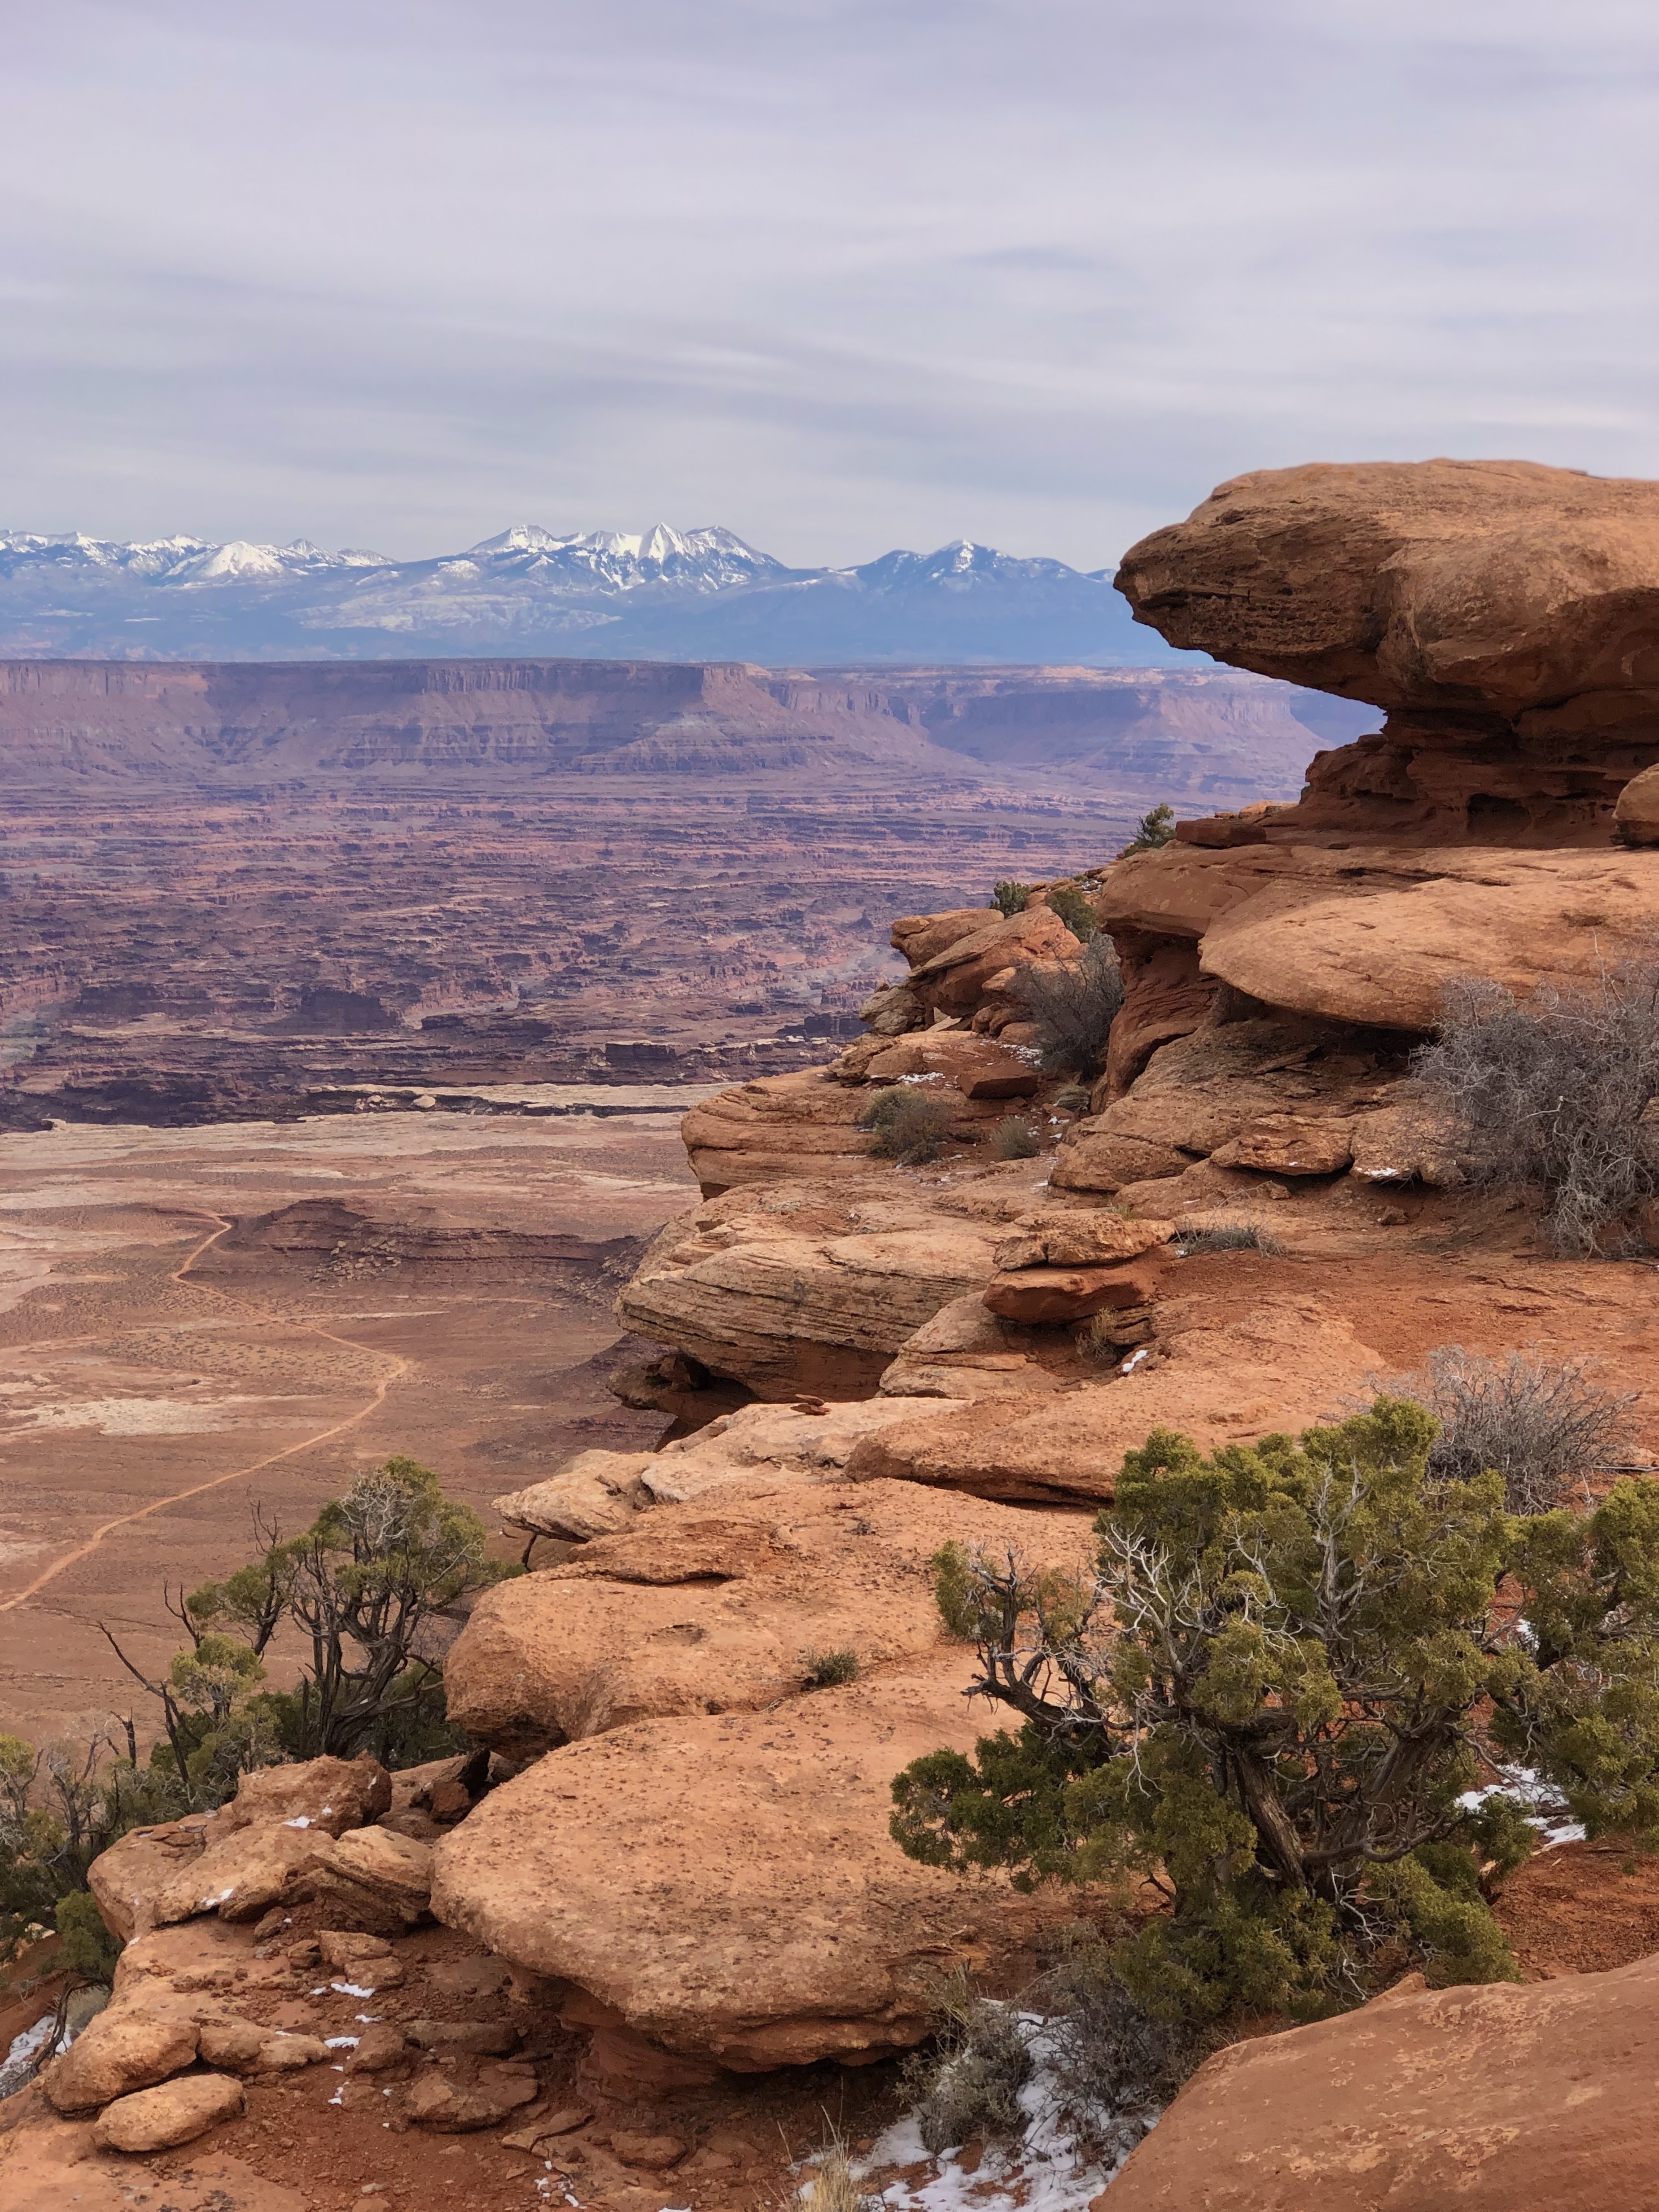 distant snowy mountains with canyon and red rock in foreground. small green juniper bushes line the hiking trail. 